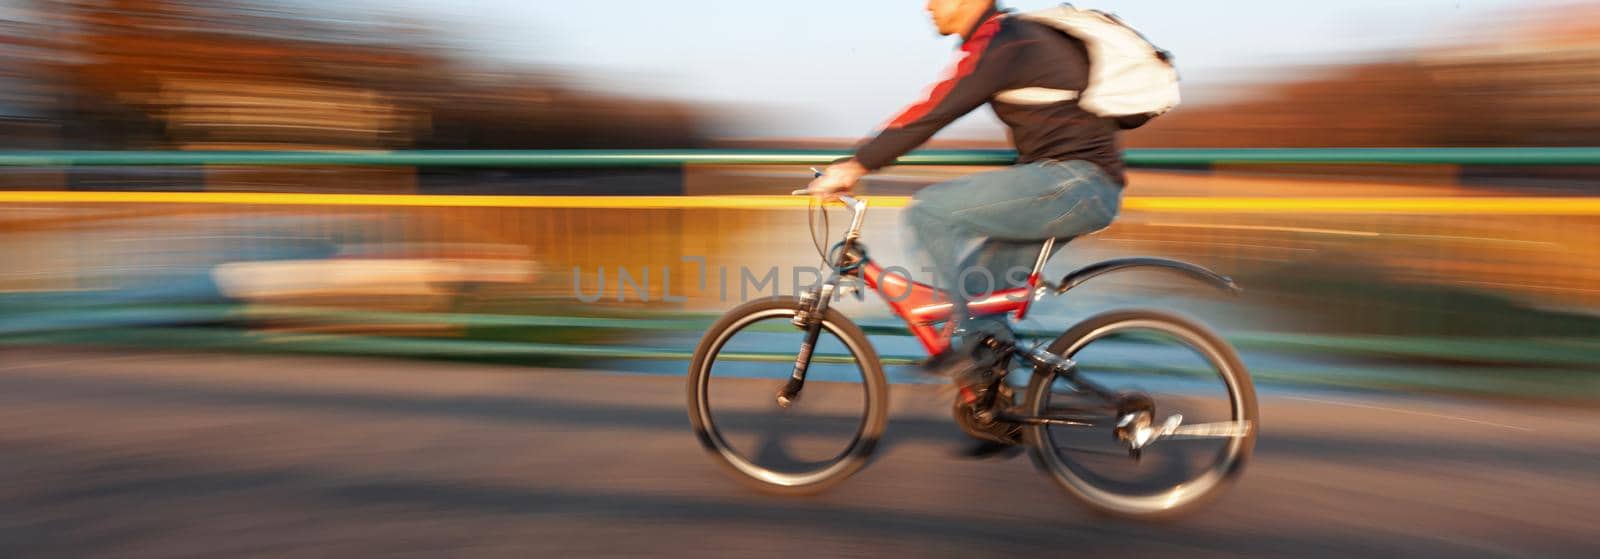 Abstract blurred image of cyclist on the city roadway. Intentional motion blur